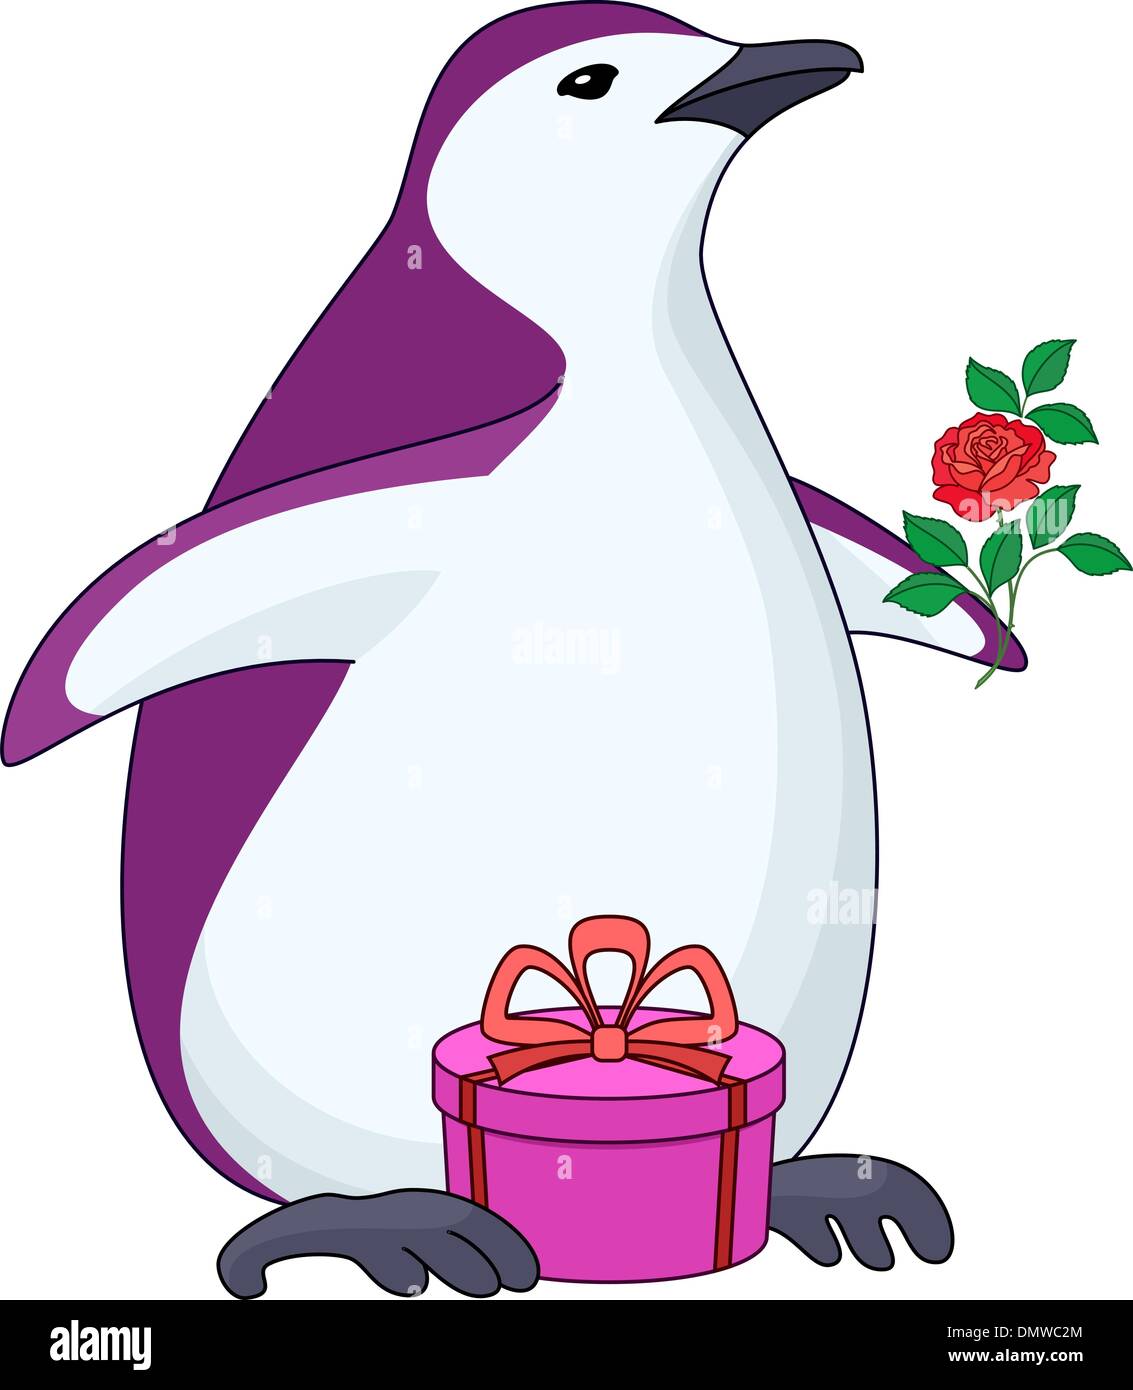 Penguin with gift and rose Stock Vector